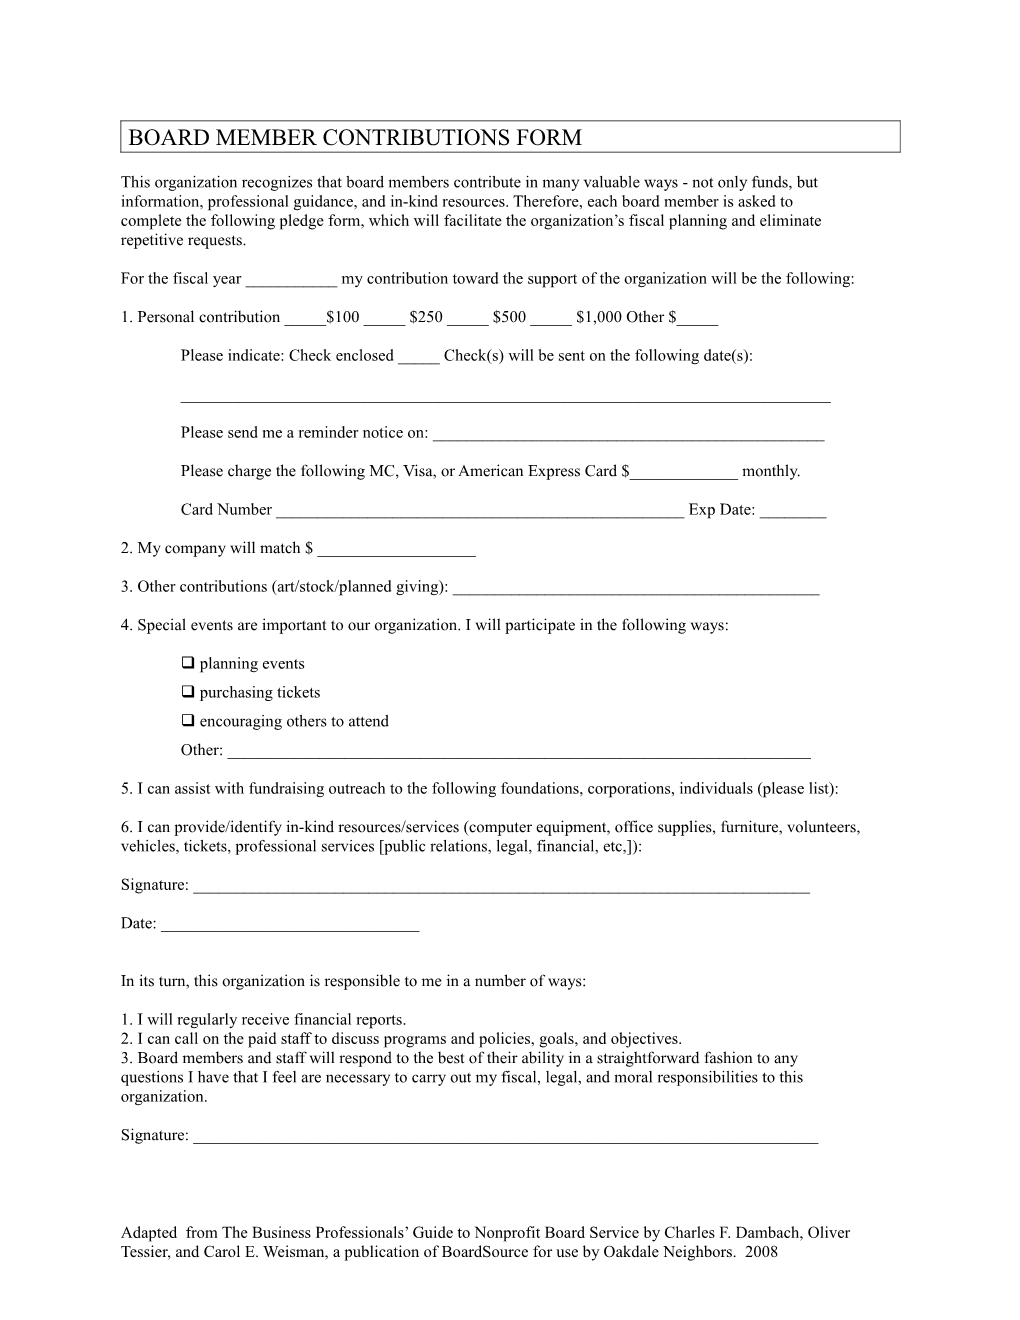 Widowed Persons Service Board Member Contributions Form